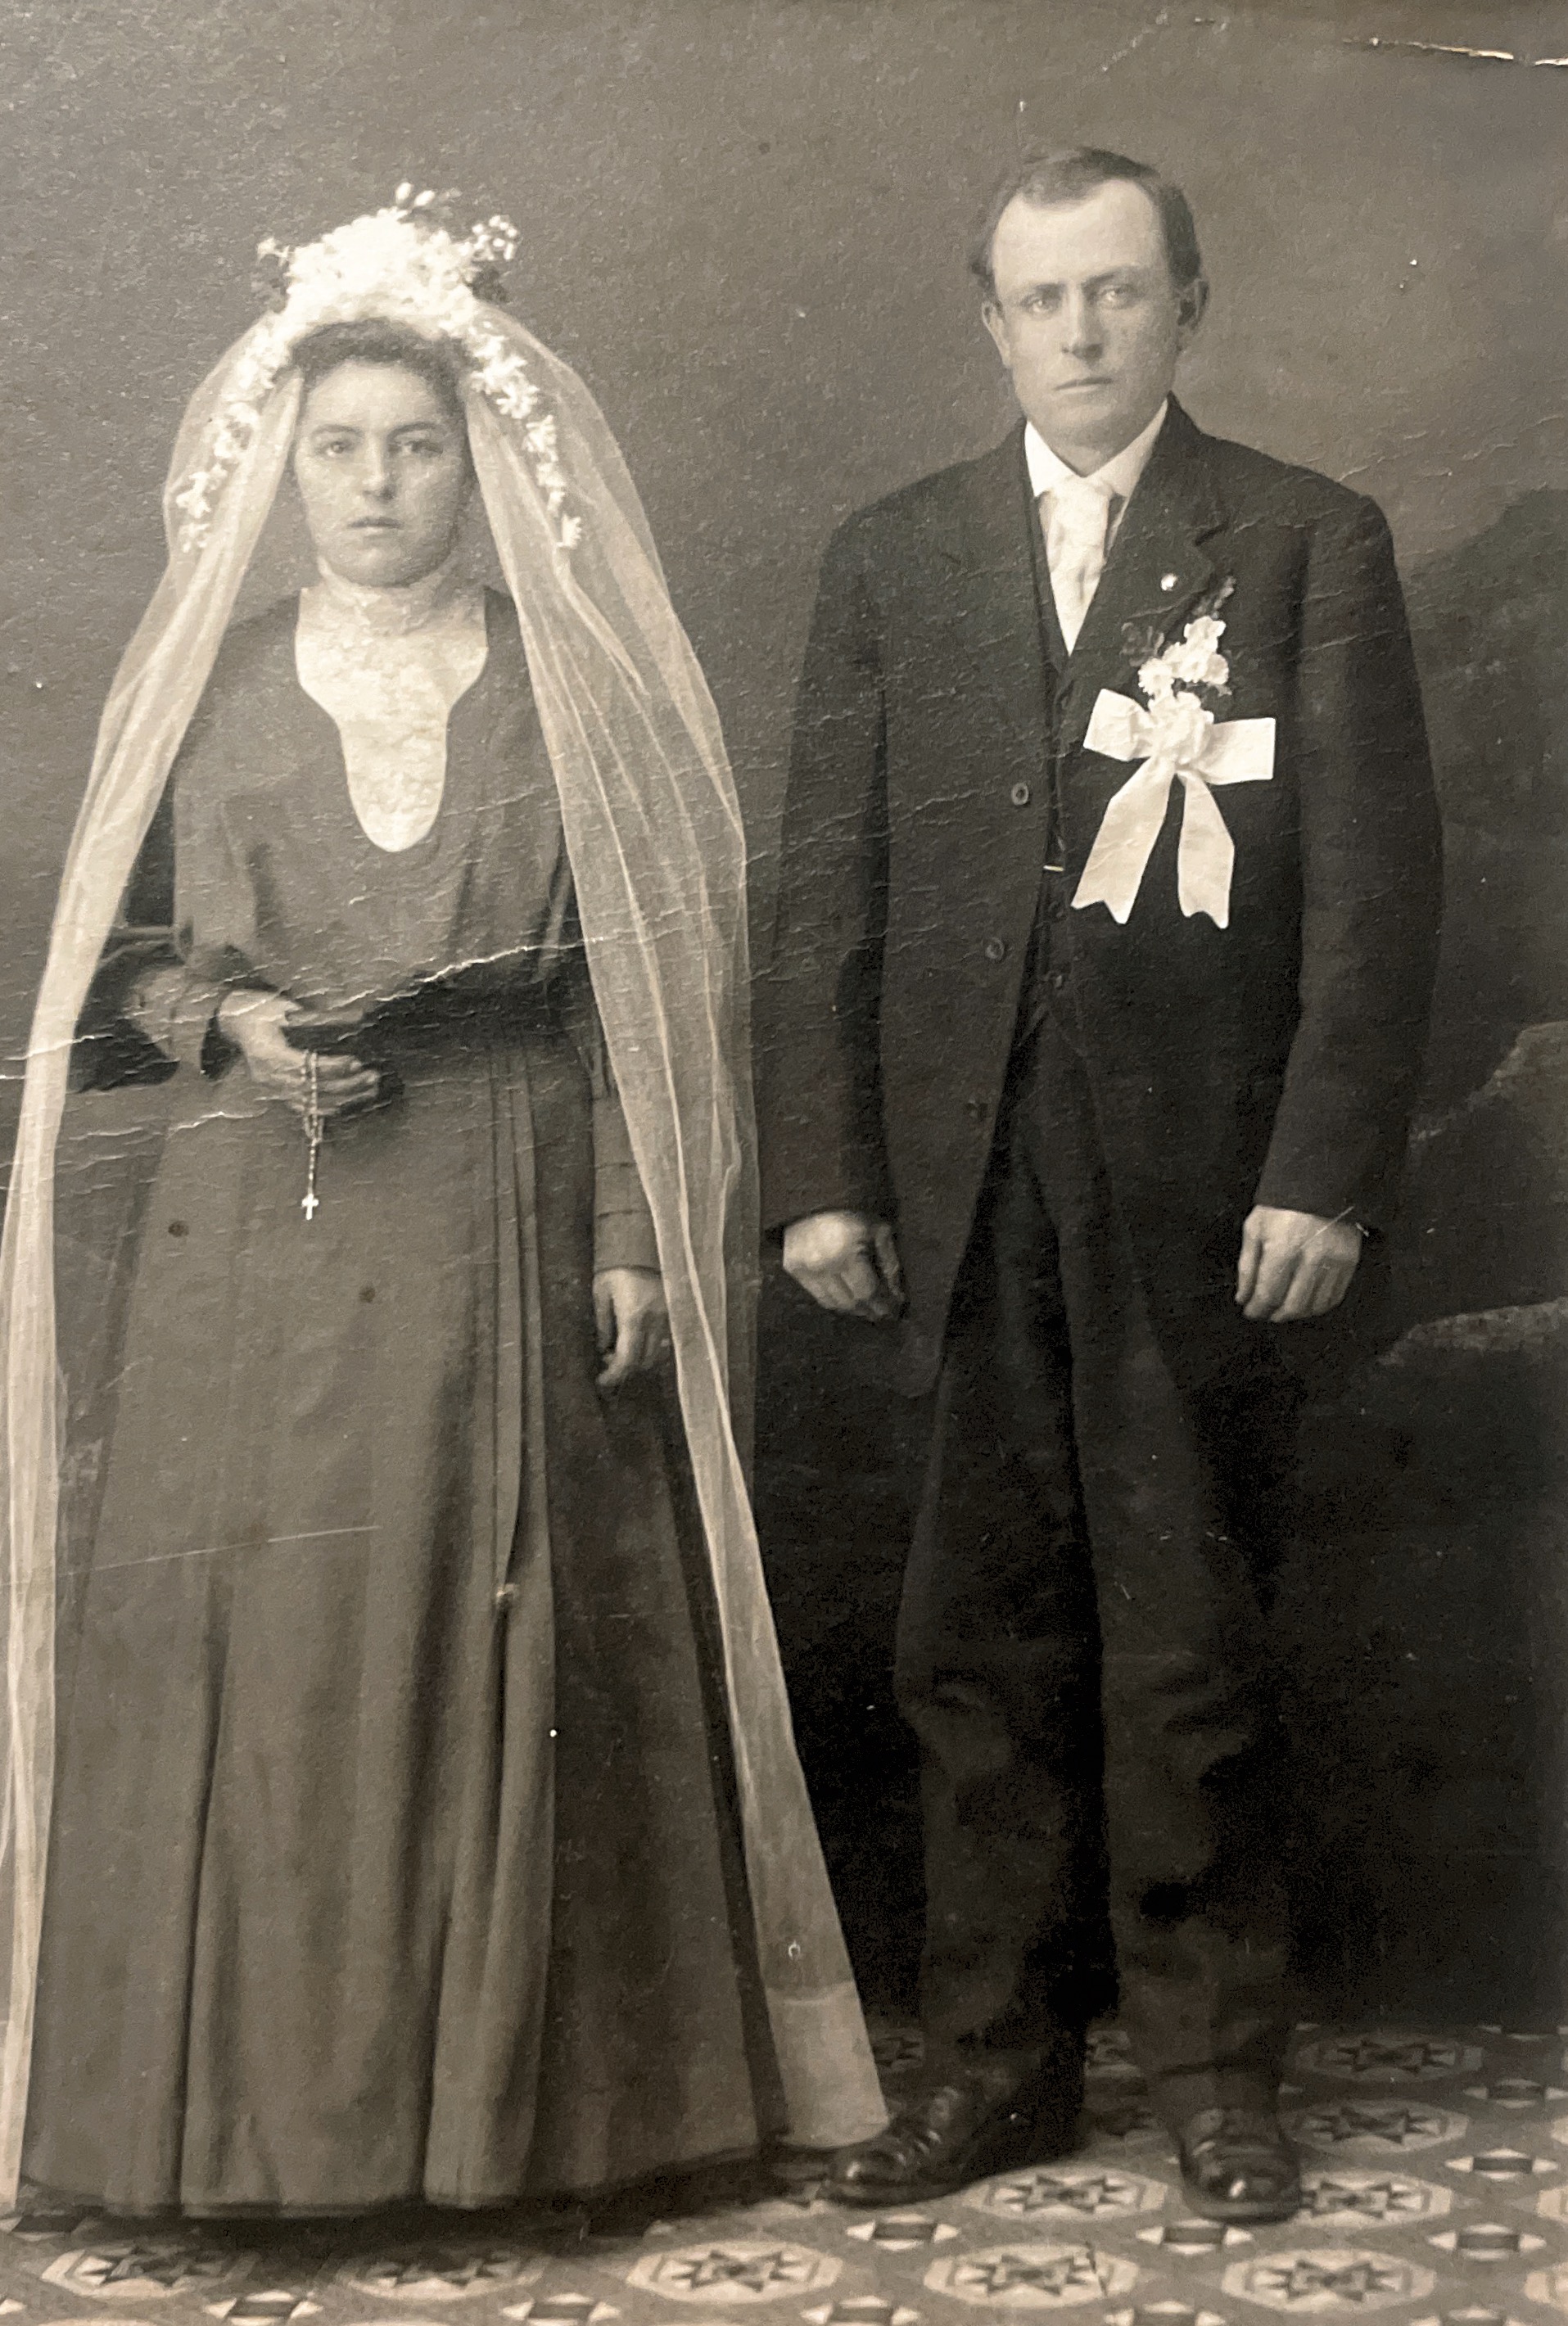 This is Rose and FJ Klee (Frank Joseph) their wedding picture 1907.